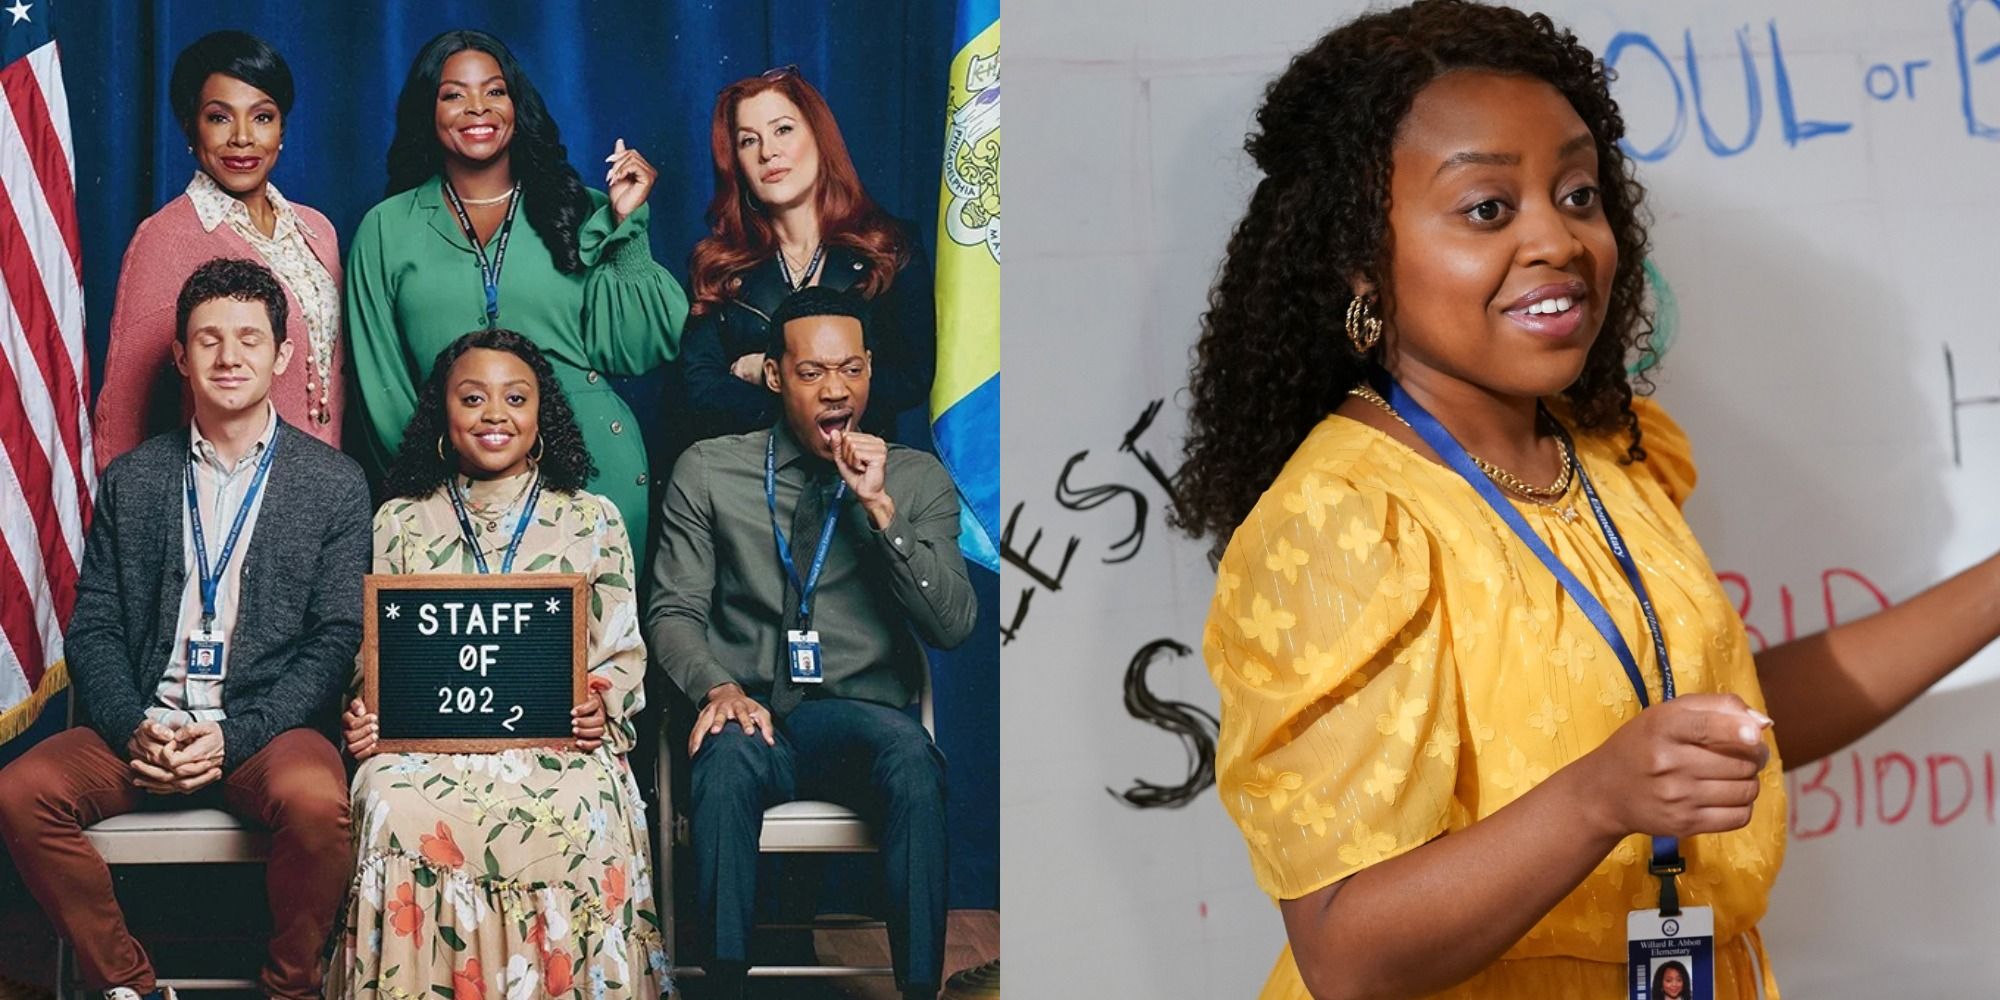 Split image showing the cast of Abbott Elementary and Janine